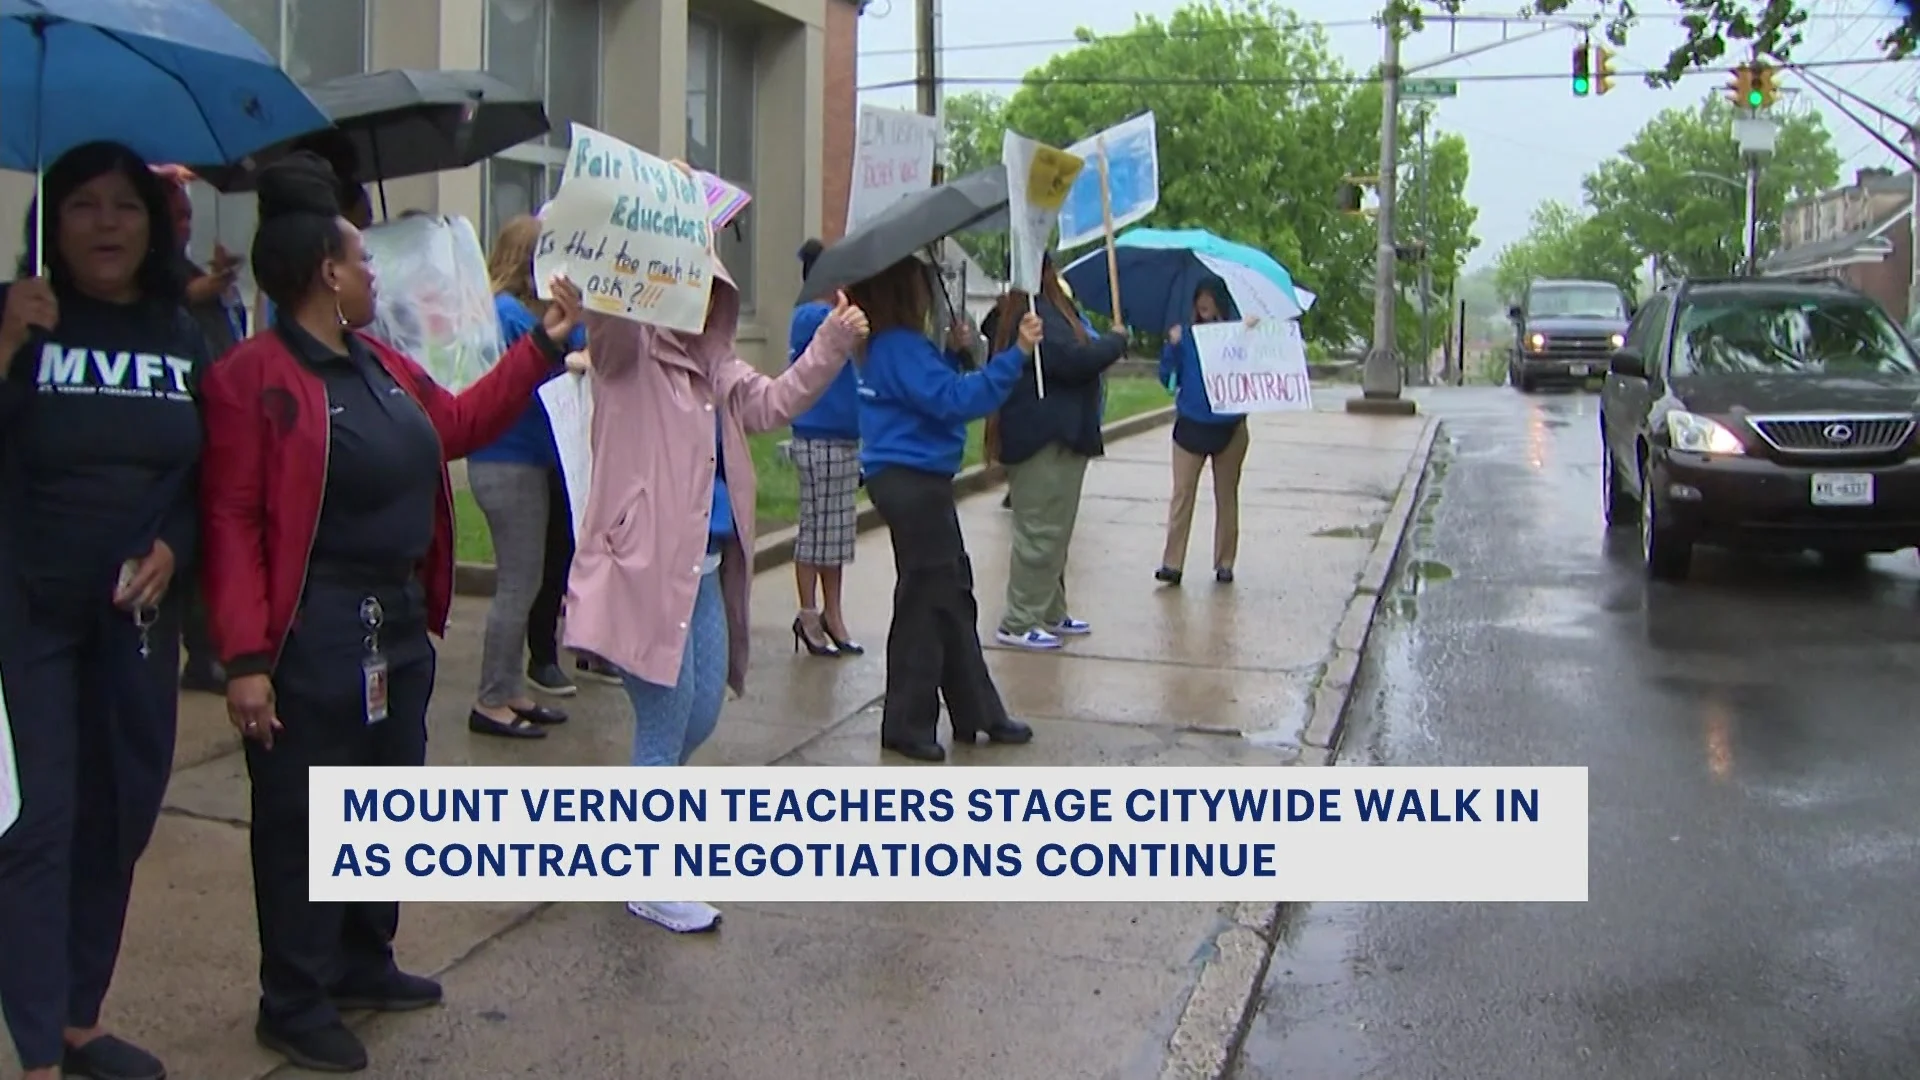 Mount Vernon teachers stage a ‘walk-in’ protest demanding contract negotiations: We’re serious about our demands.